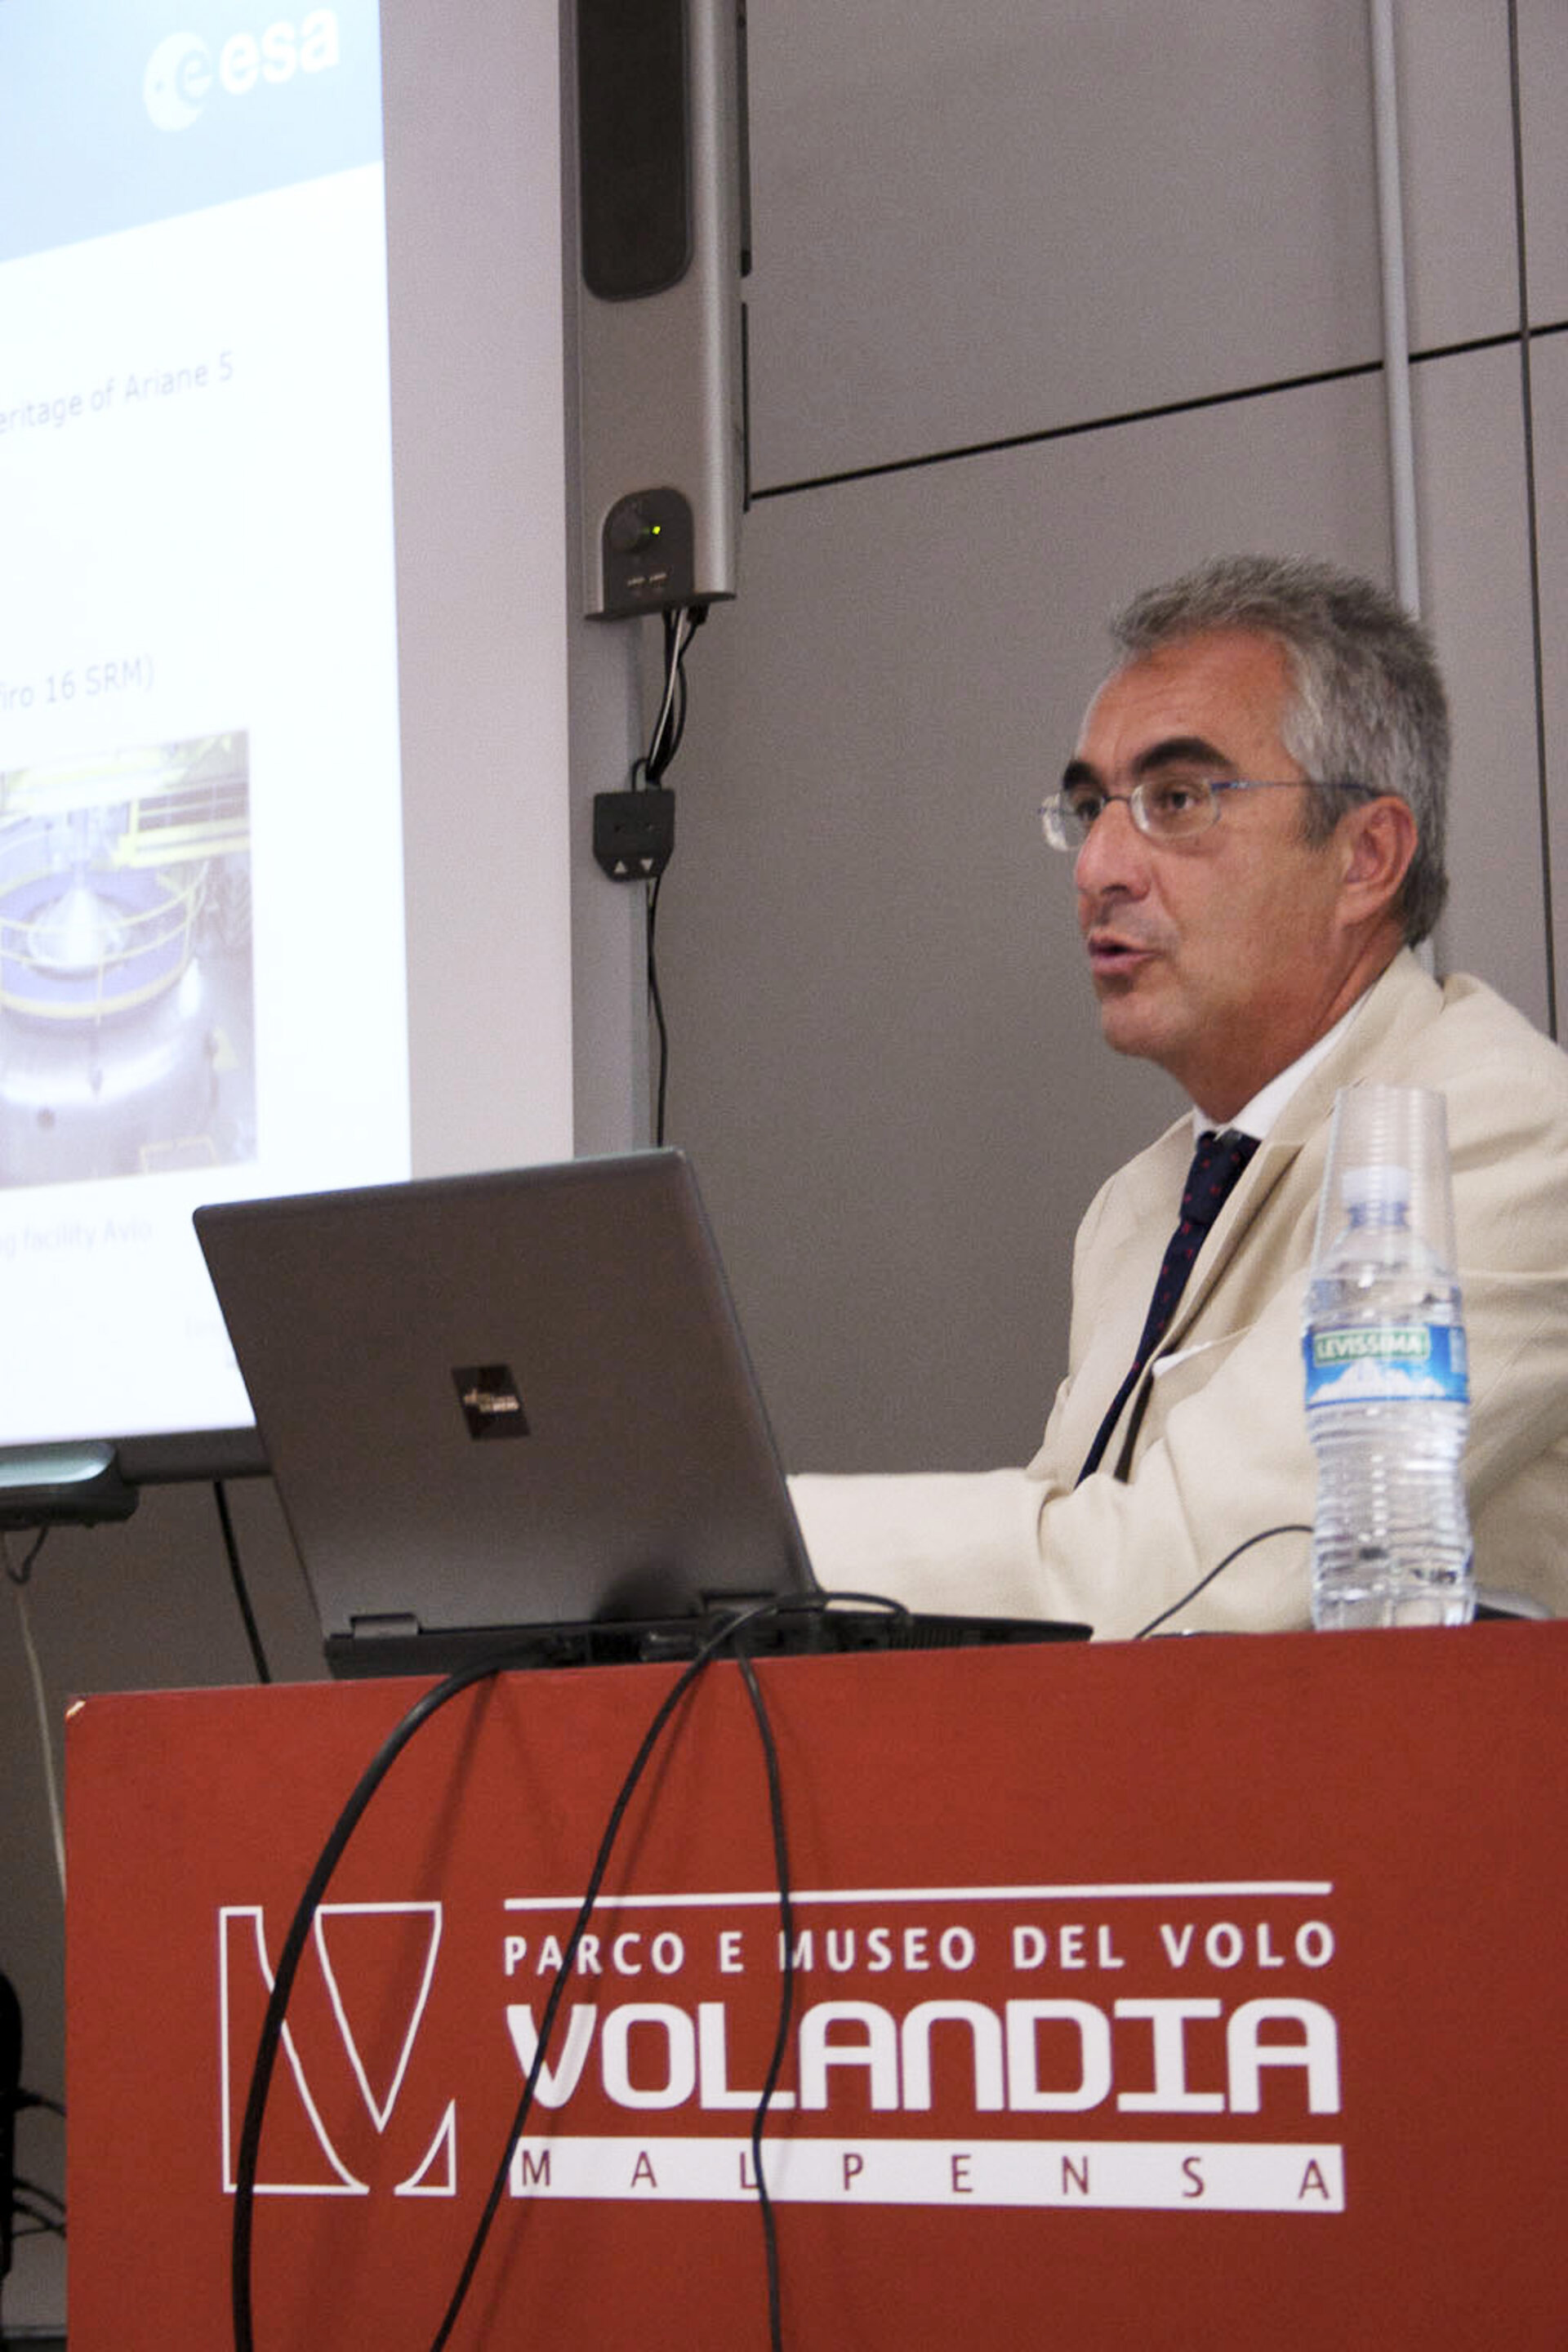 Ing. Bianchi at the Congress "Space in Italy", Volandia